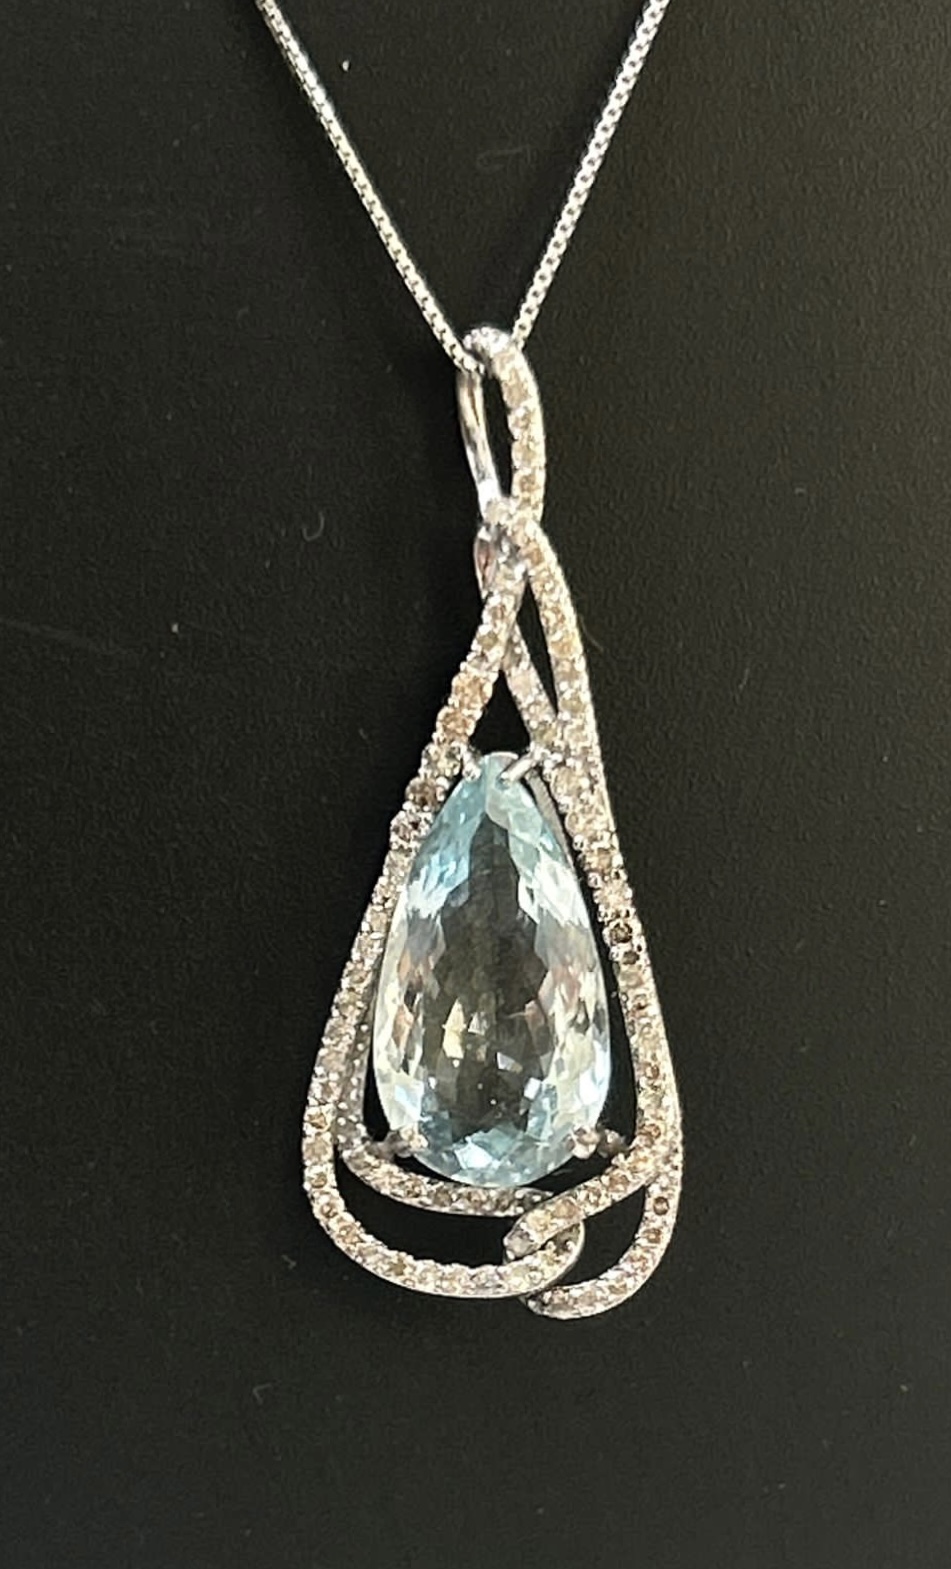 Beautiful Natural Flawless 8.81 CT Aquamarine Pendant With Diamonds and 18k Gold - Image 4 of 8